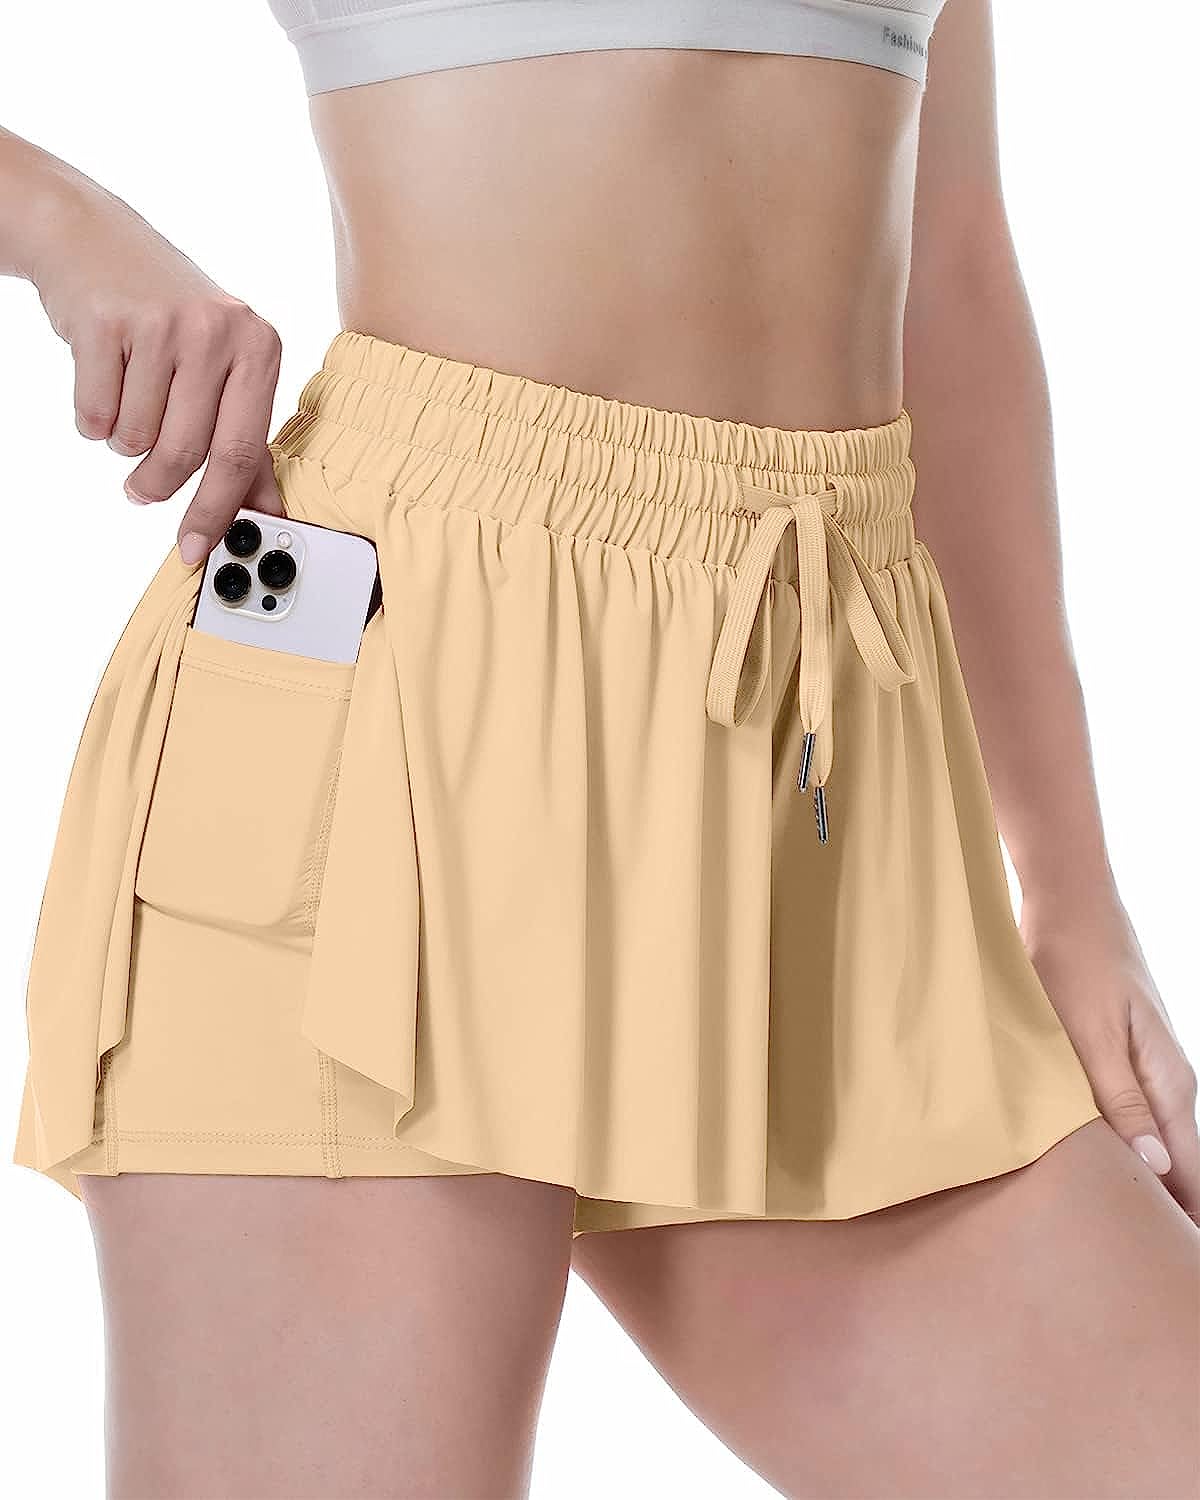 Flowy Shorts, 2 in 1 Butterfly Shorts High Waisted Athletic Shorts